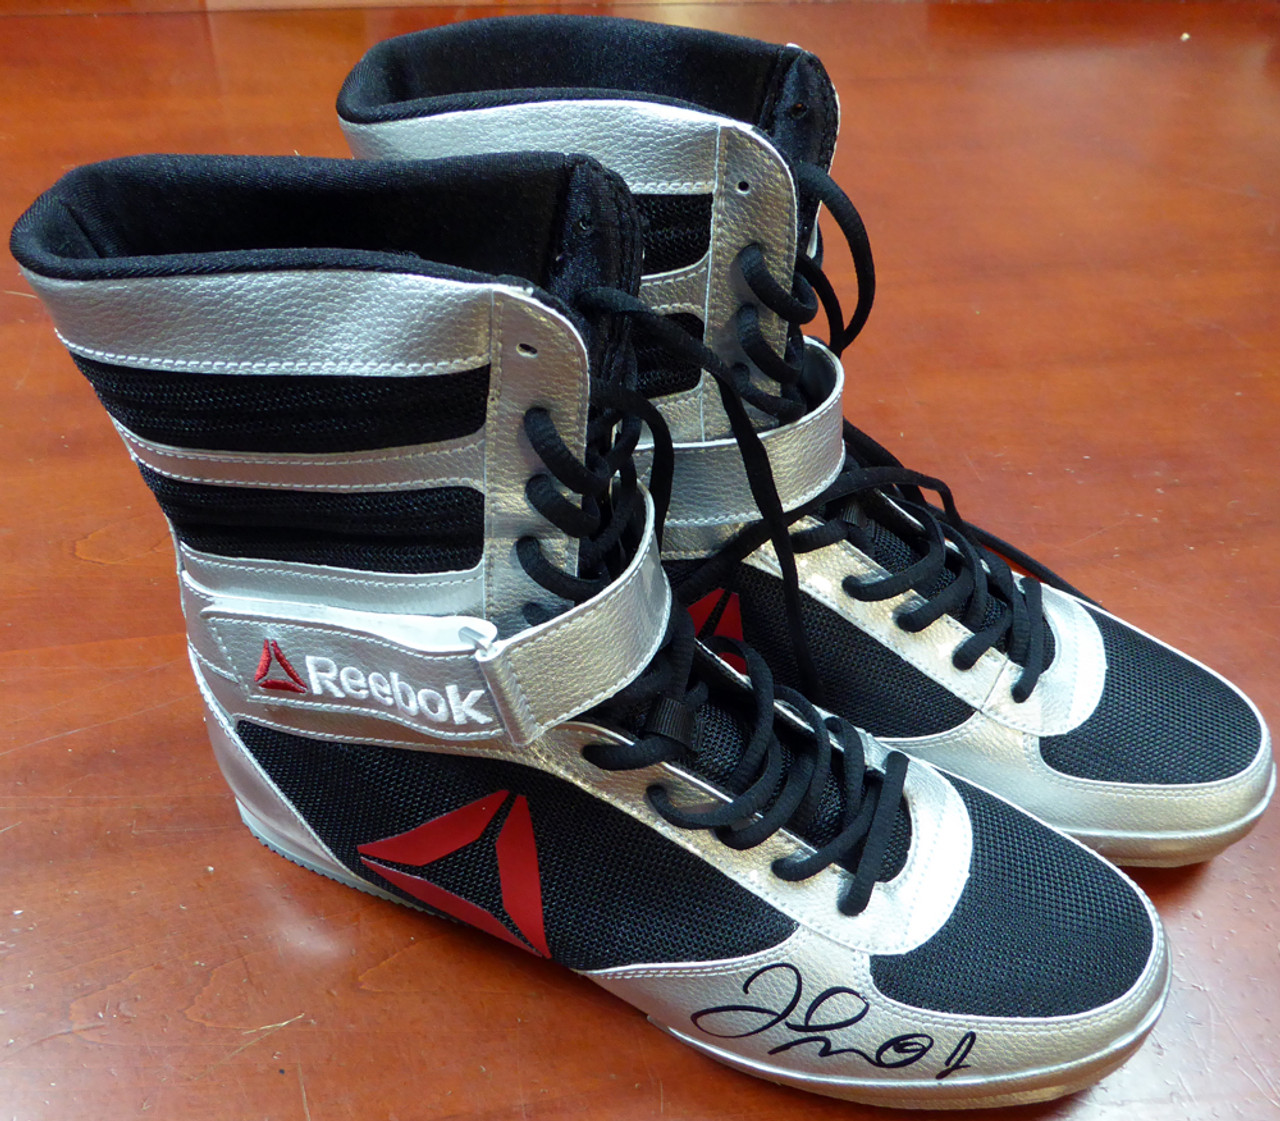 Floyd Mayweather Jr. Autographed Reebok Silver Boxing Shoes BAS #121801 - Mill Creek